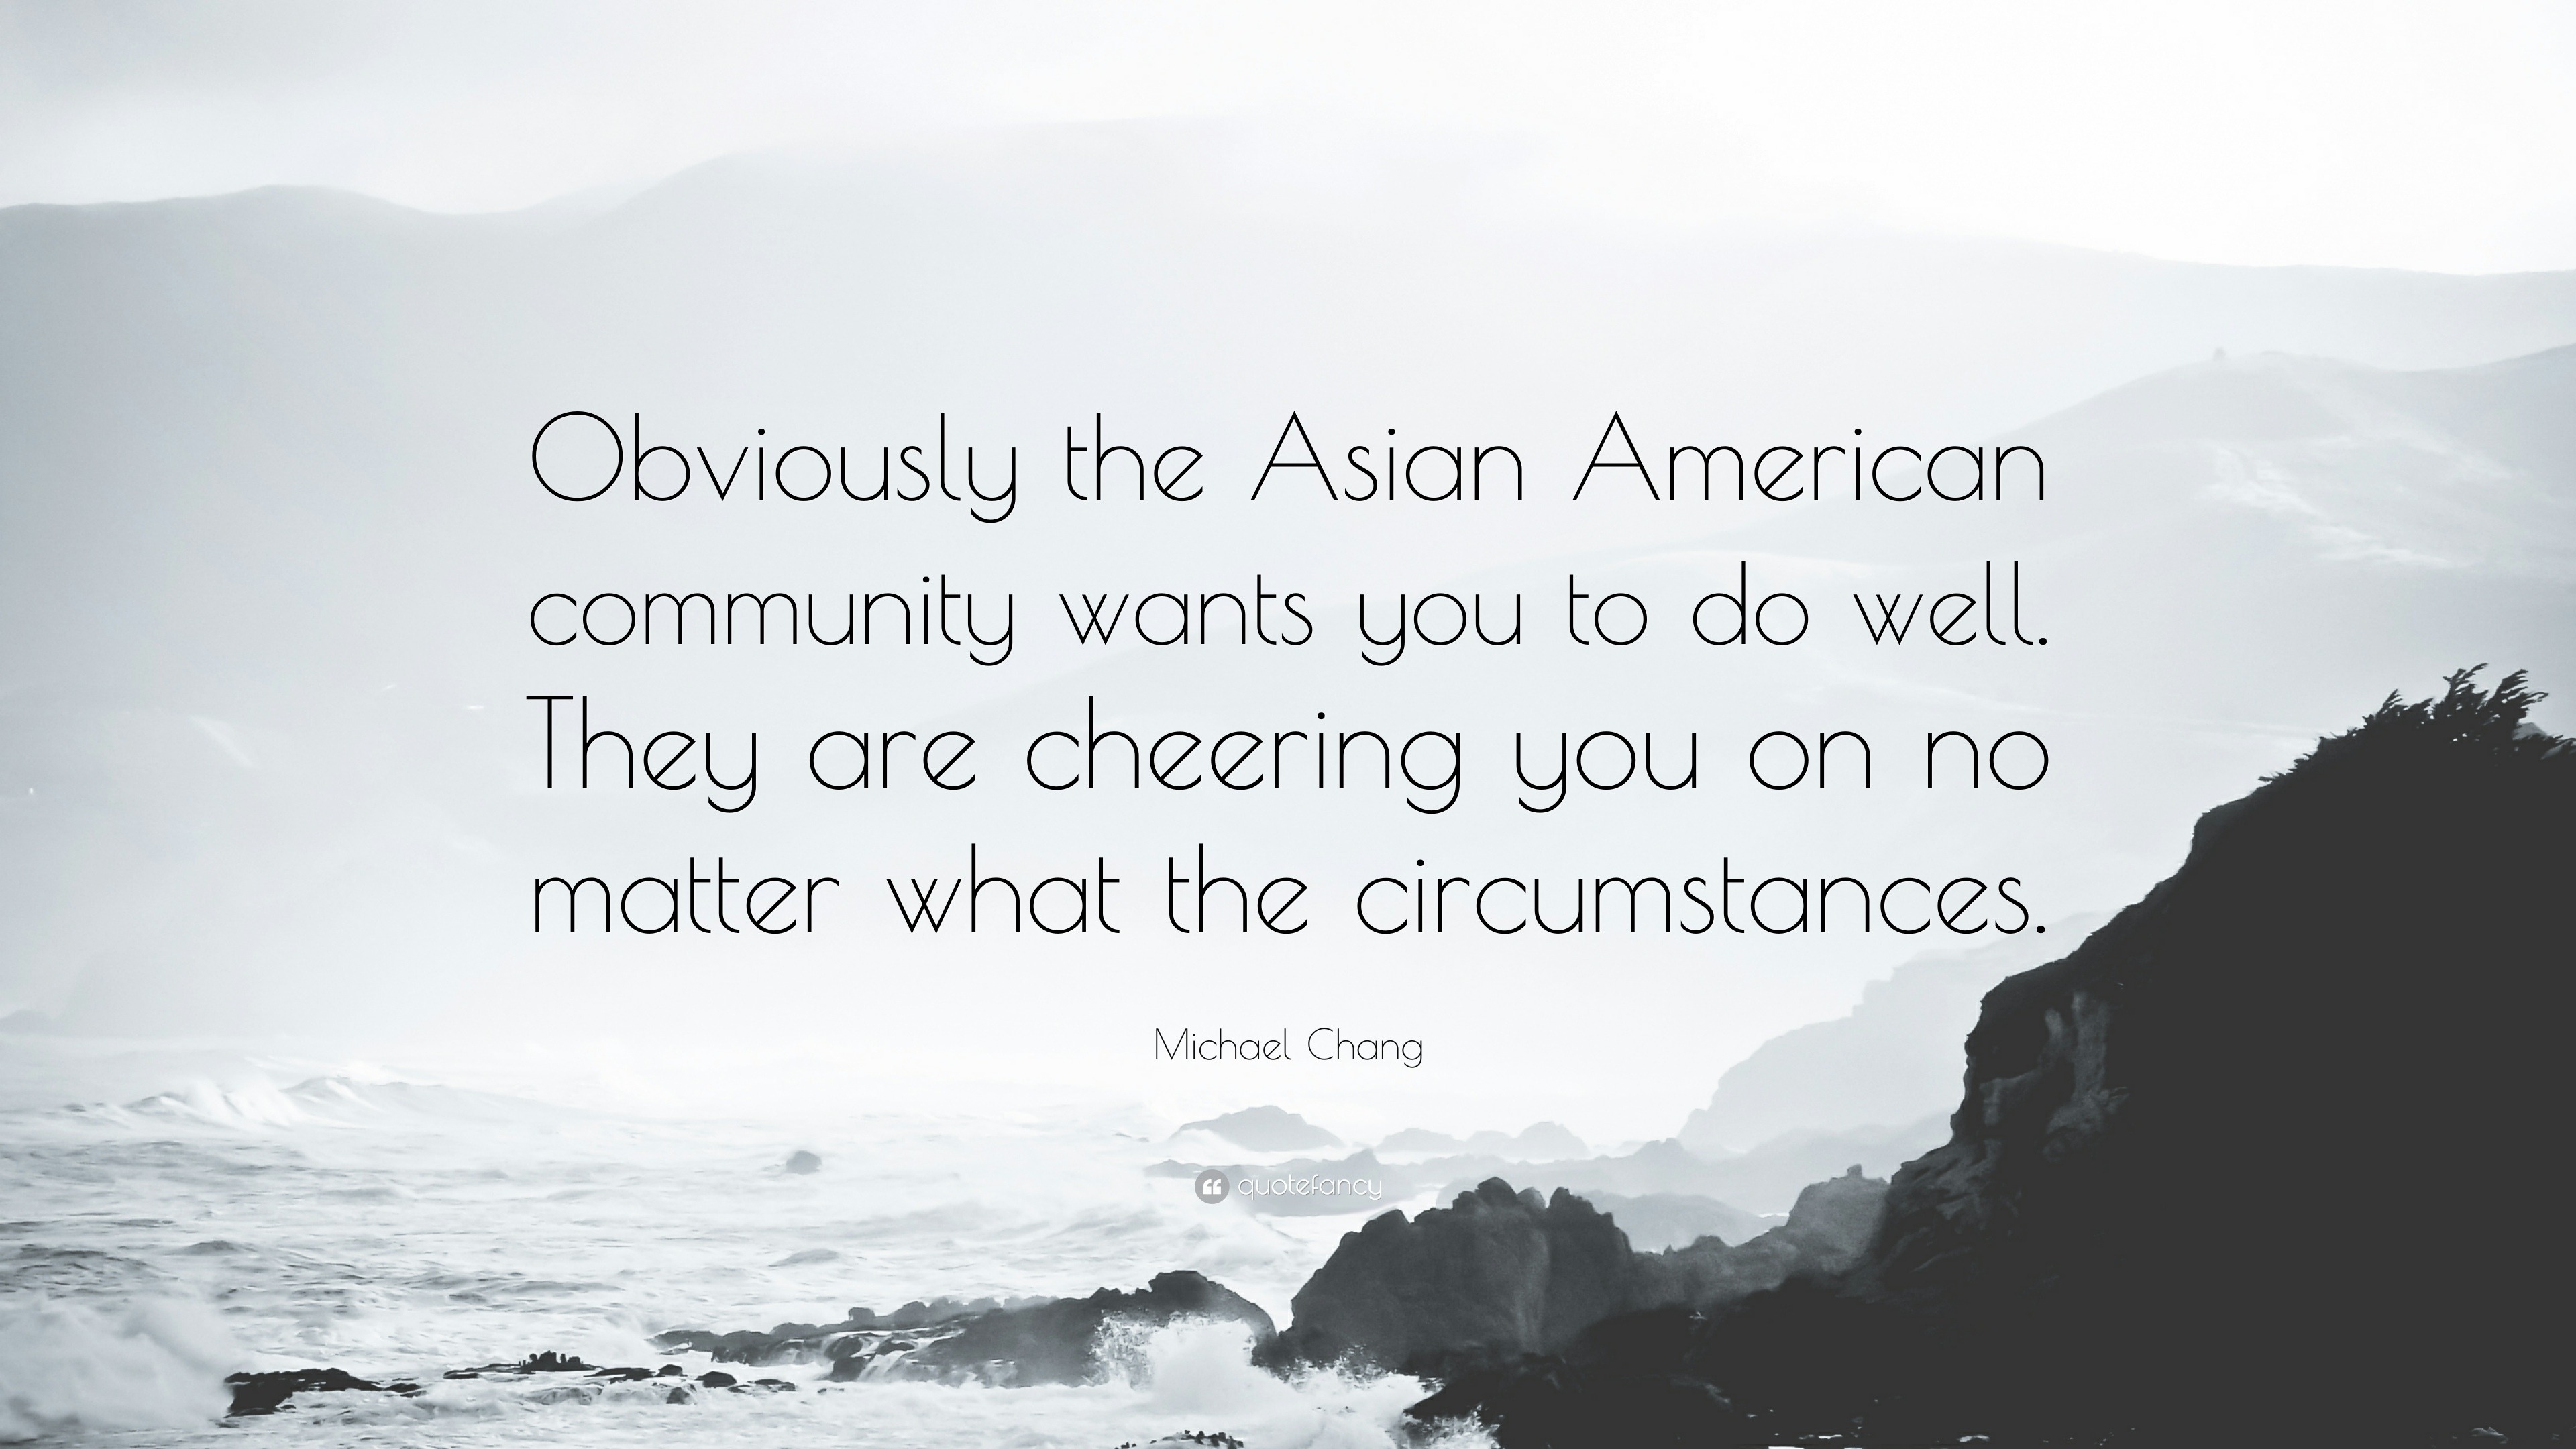 chang community quotes